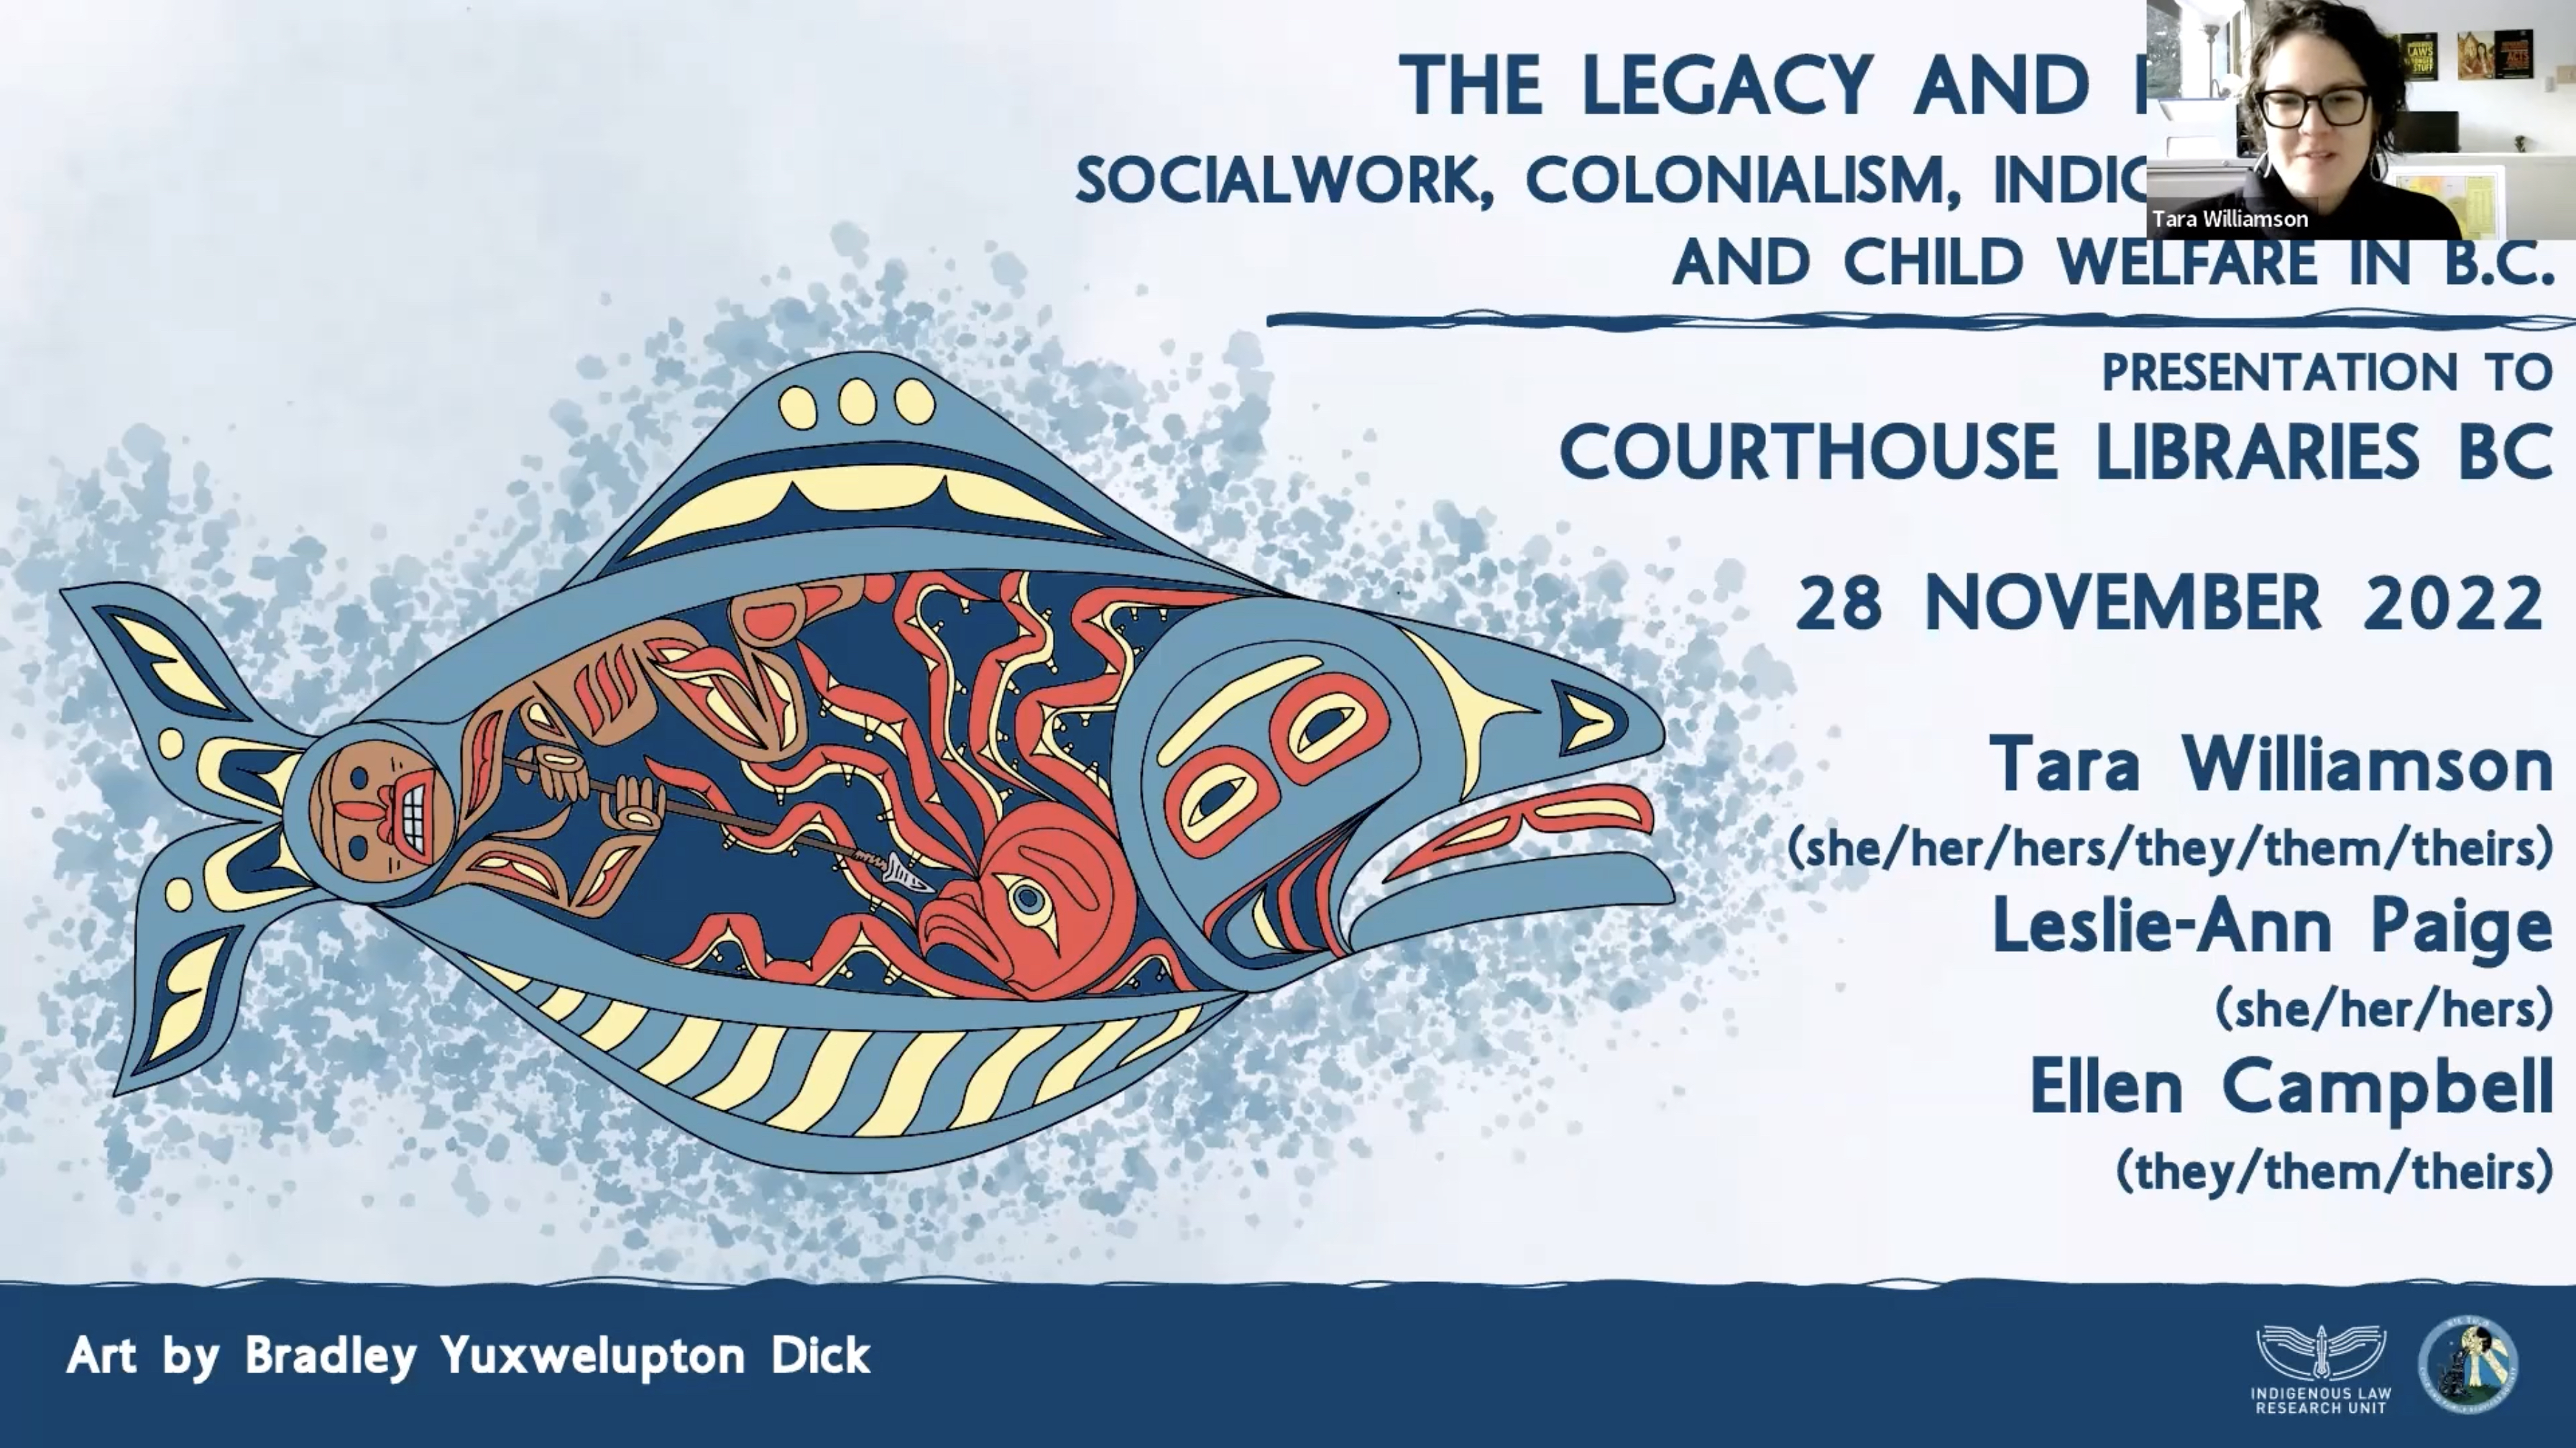 On the left of the photo is a piece of art by Bradley Yuxwelupton Dick. It is a line art picture of a halibut that, inside, includes an octopus and a person spearing that octopus. Behind it is watercolour splash. To the right are the words "The Legacy and Future of Social Work, Colonialism, Indigenous Law, and Child Welfare in BC: Presentation to Courthouse Libraries BC 28 November 2022, Tara Williamson (she/her/hers/they/them/theirs), Leslie-Ann Paige (she/her/hers), and Ellen Campbell (they/them/theirs)"